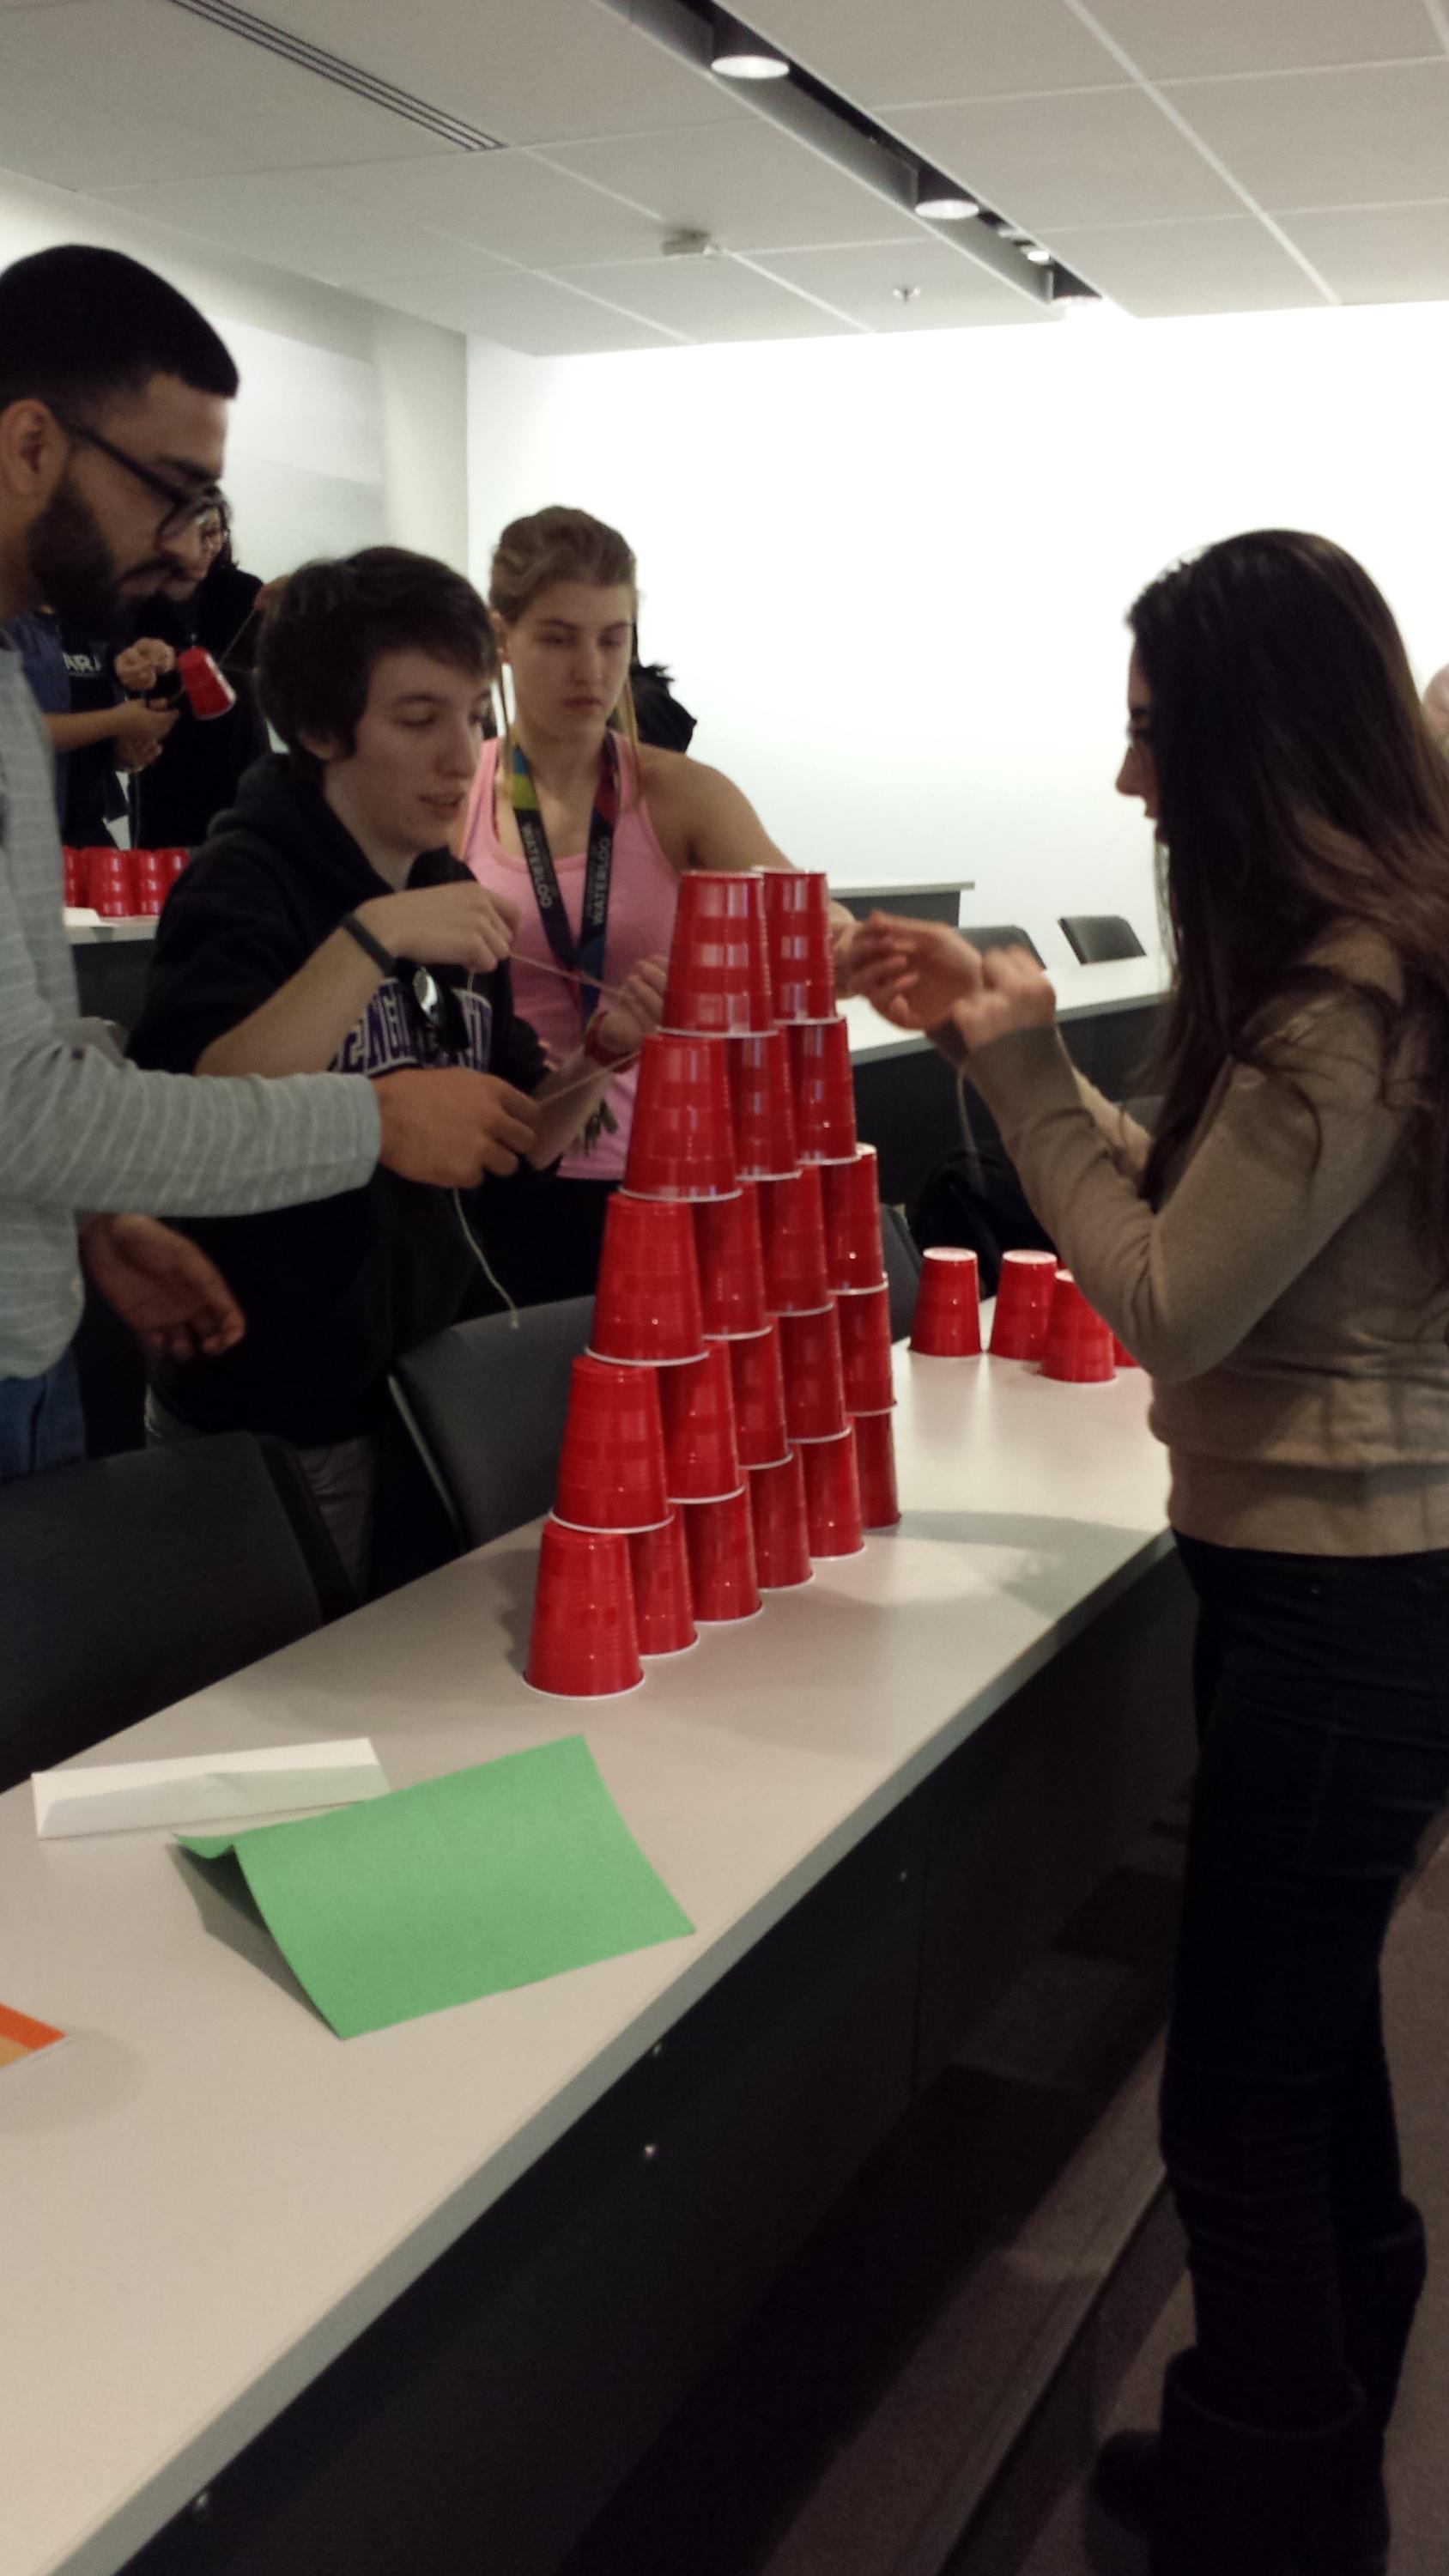 Stacking-Cups-Tower